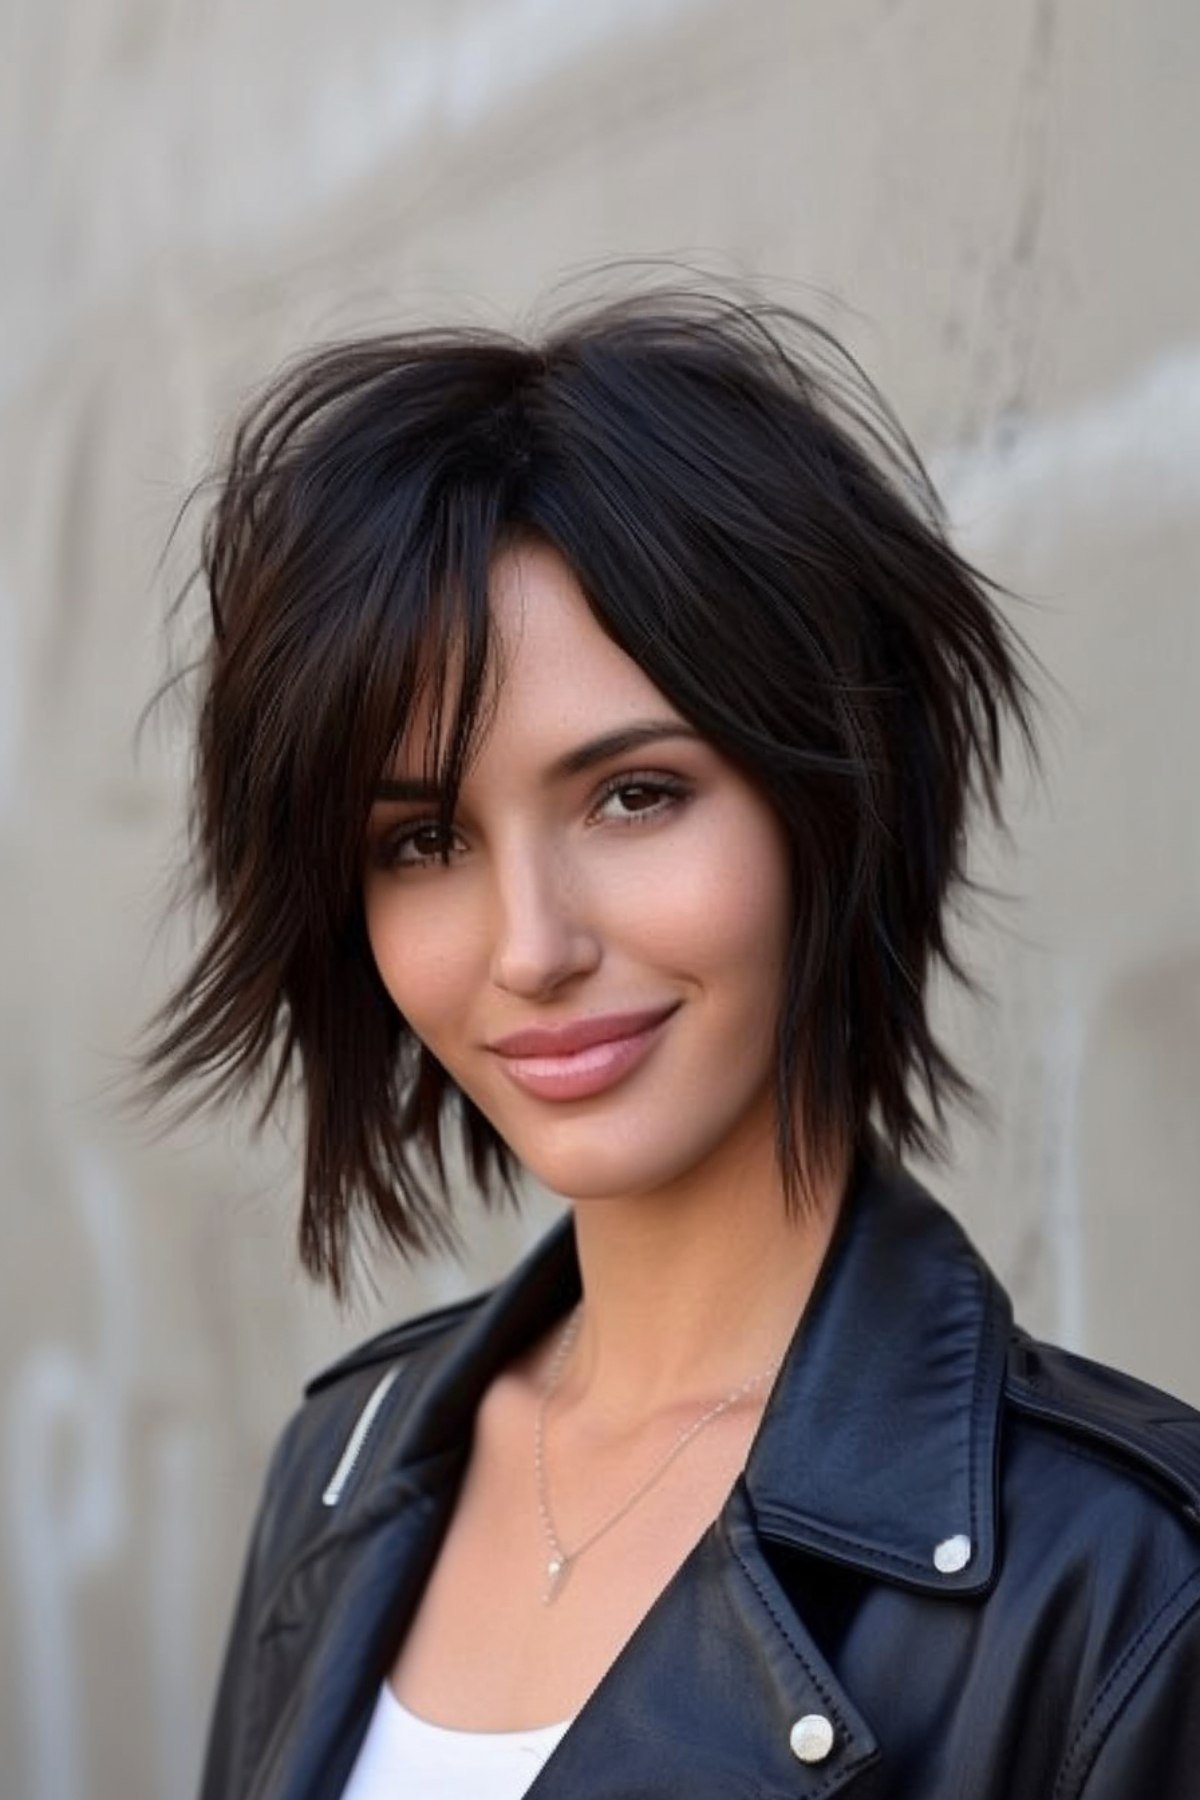 Woman with a sleek Wolf Cut on straight hair, showing off her textured layers that make the style both chic and spirited.